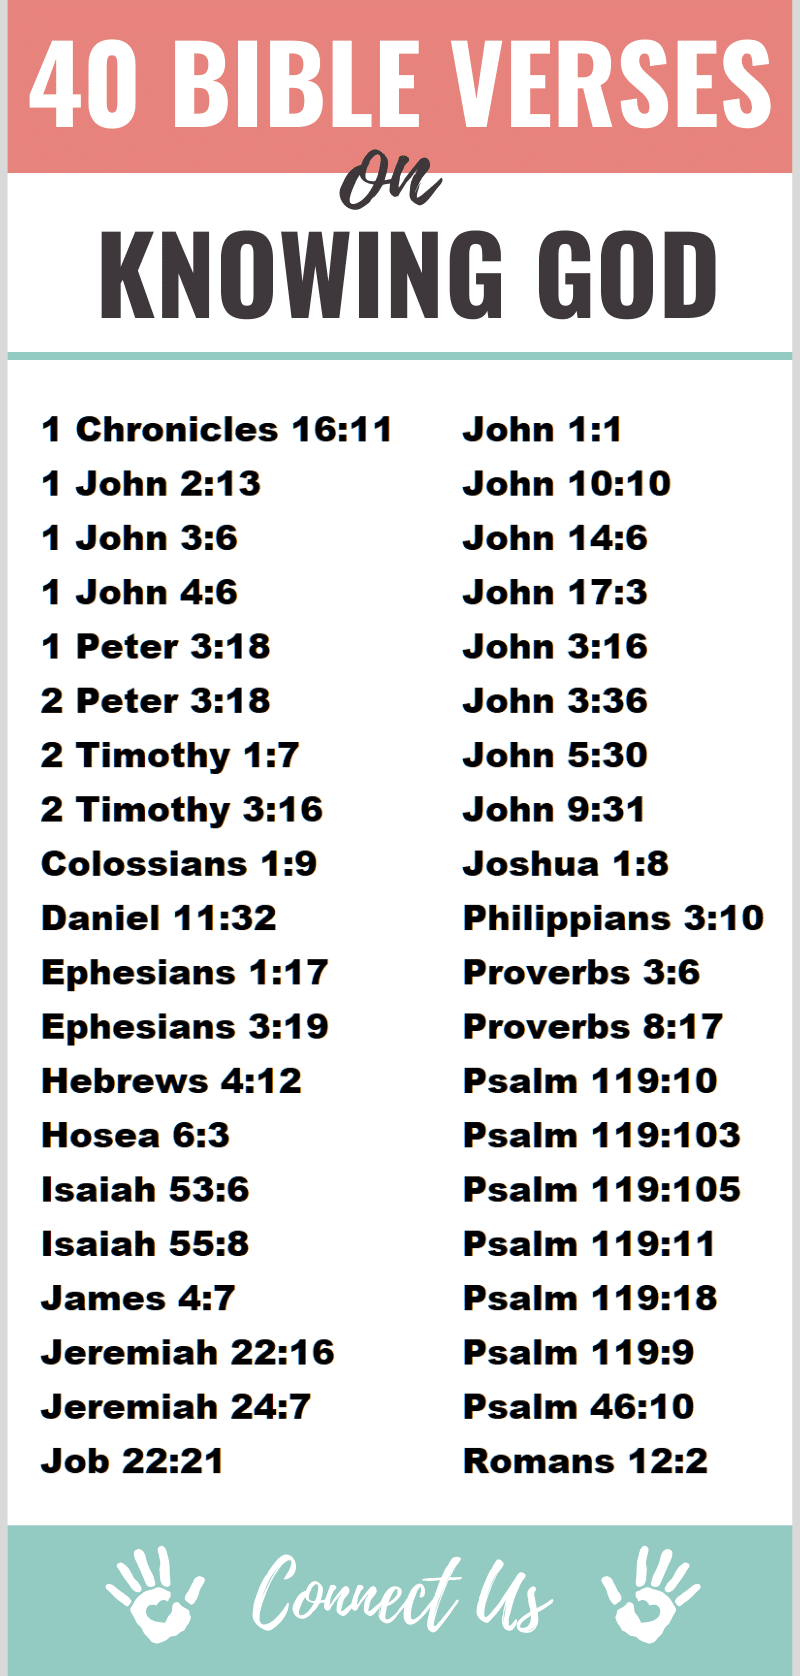 Bible Verses on Knowing God